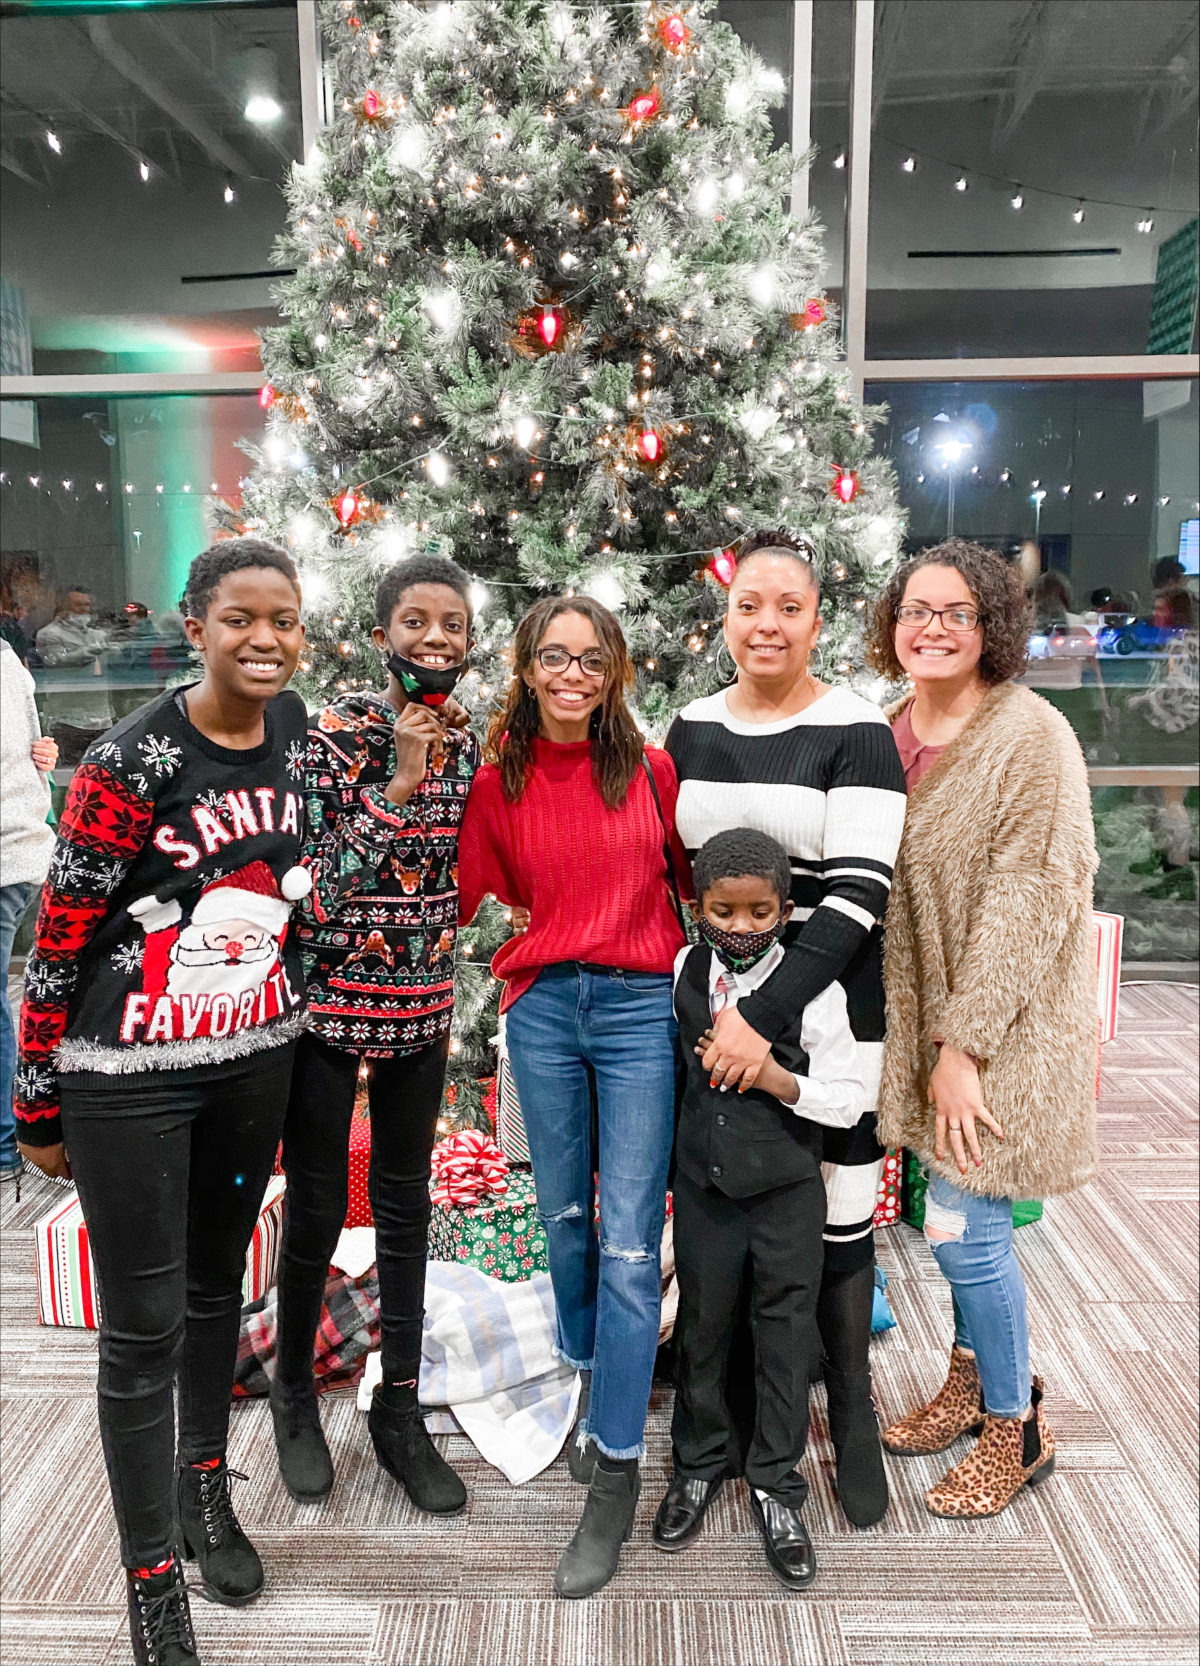 Nayla Contreras, center, poses with her family at Christmas. 